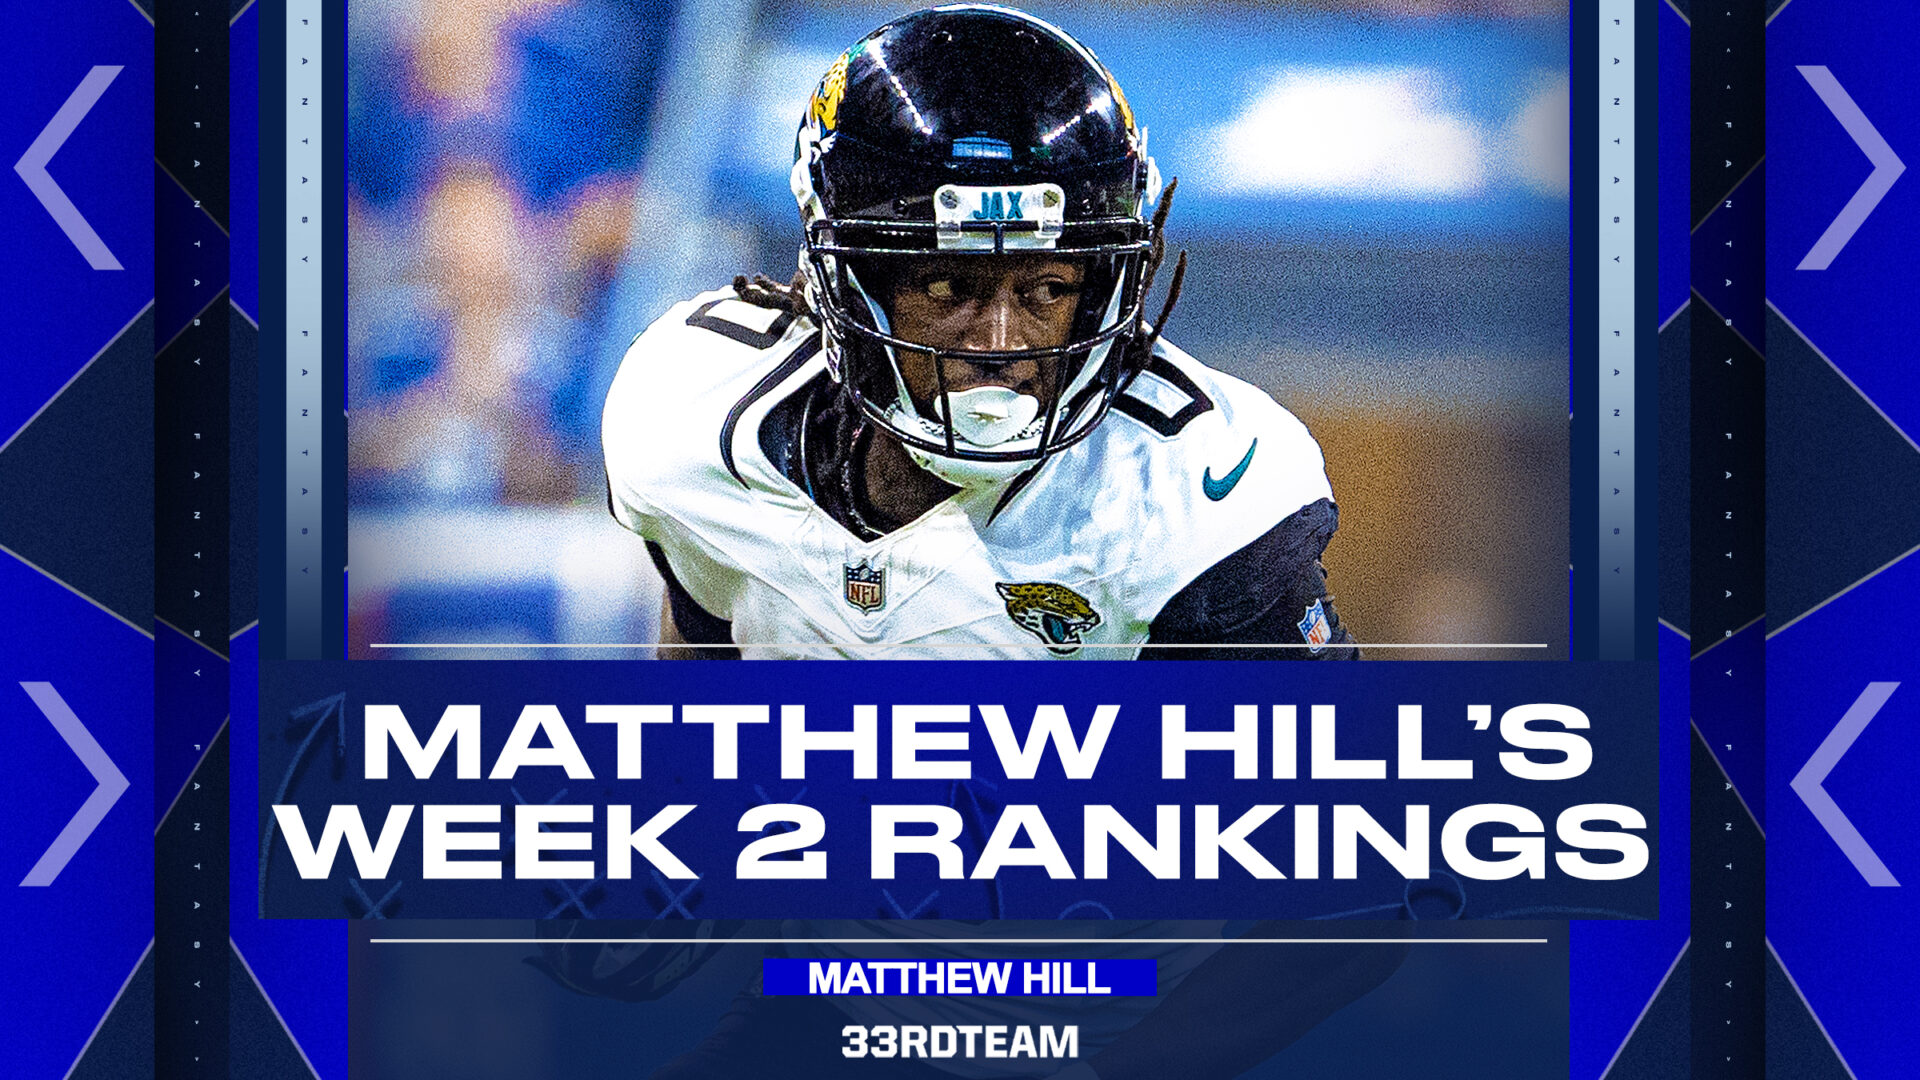 Calvin Ridley close-up image with text "Matthew Hill's Week 2 Rankings"